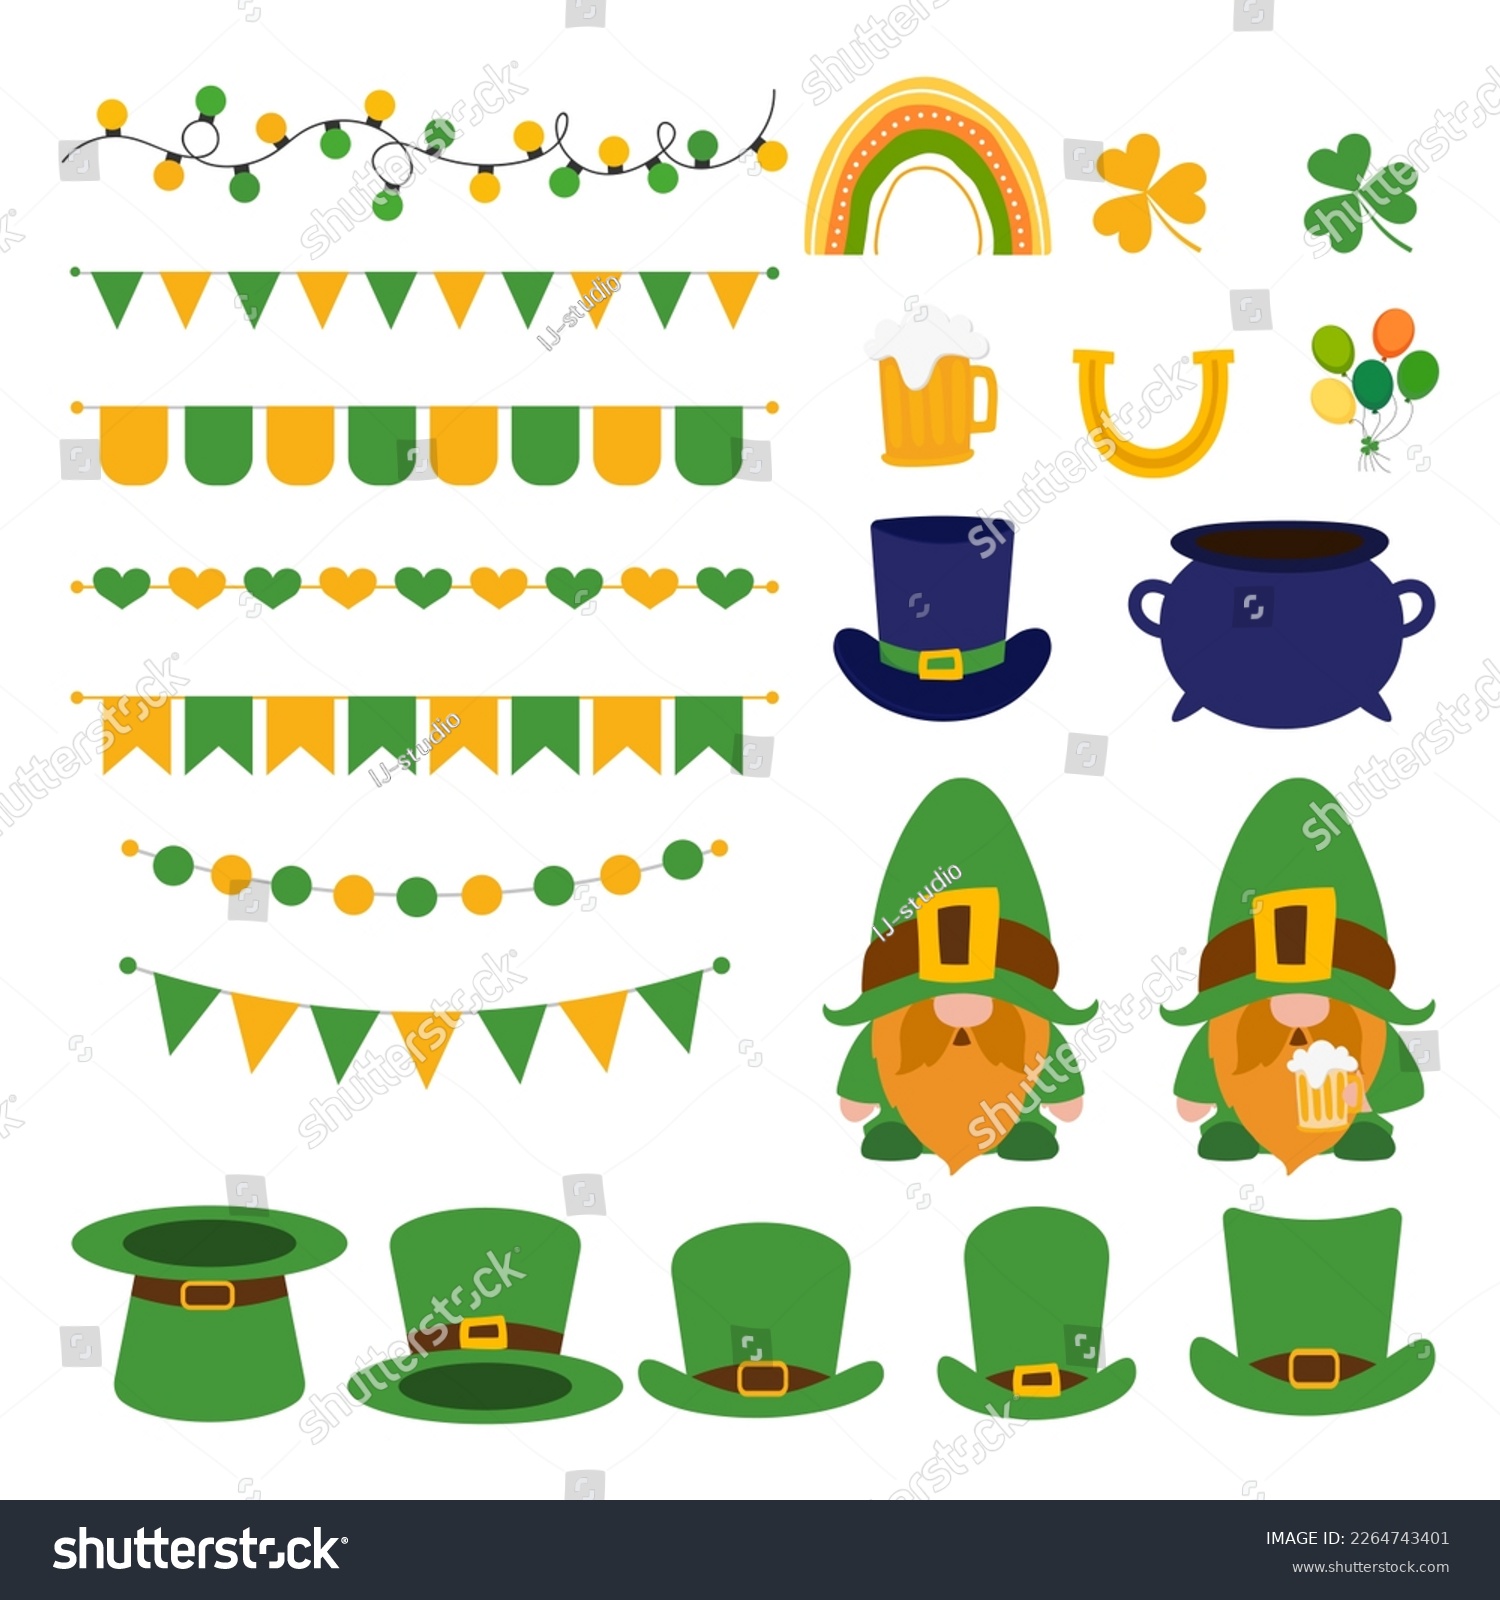 SVG of Celebrate St. Patrick's Day in style with this set of Irish holiday elements.St.Patrick's Day .Irish Holiday Vector svg